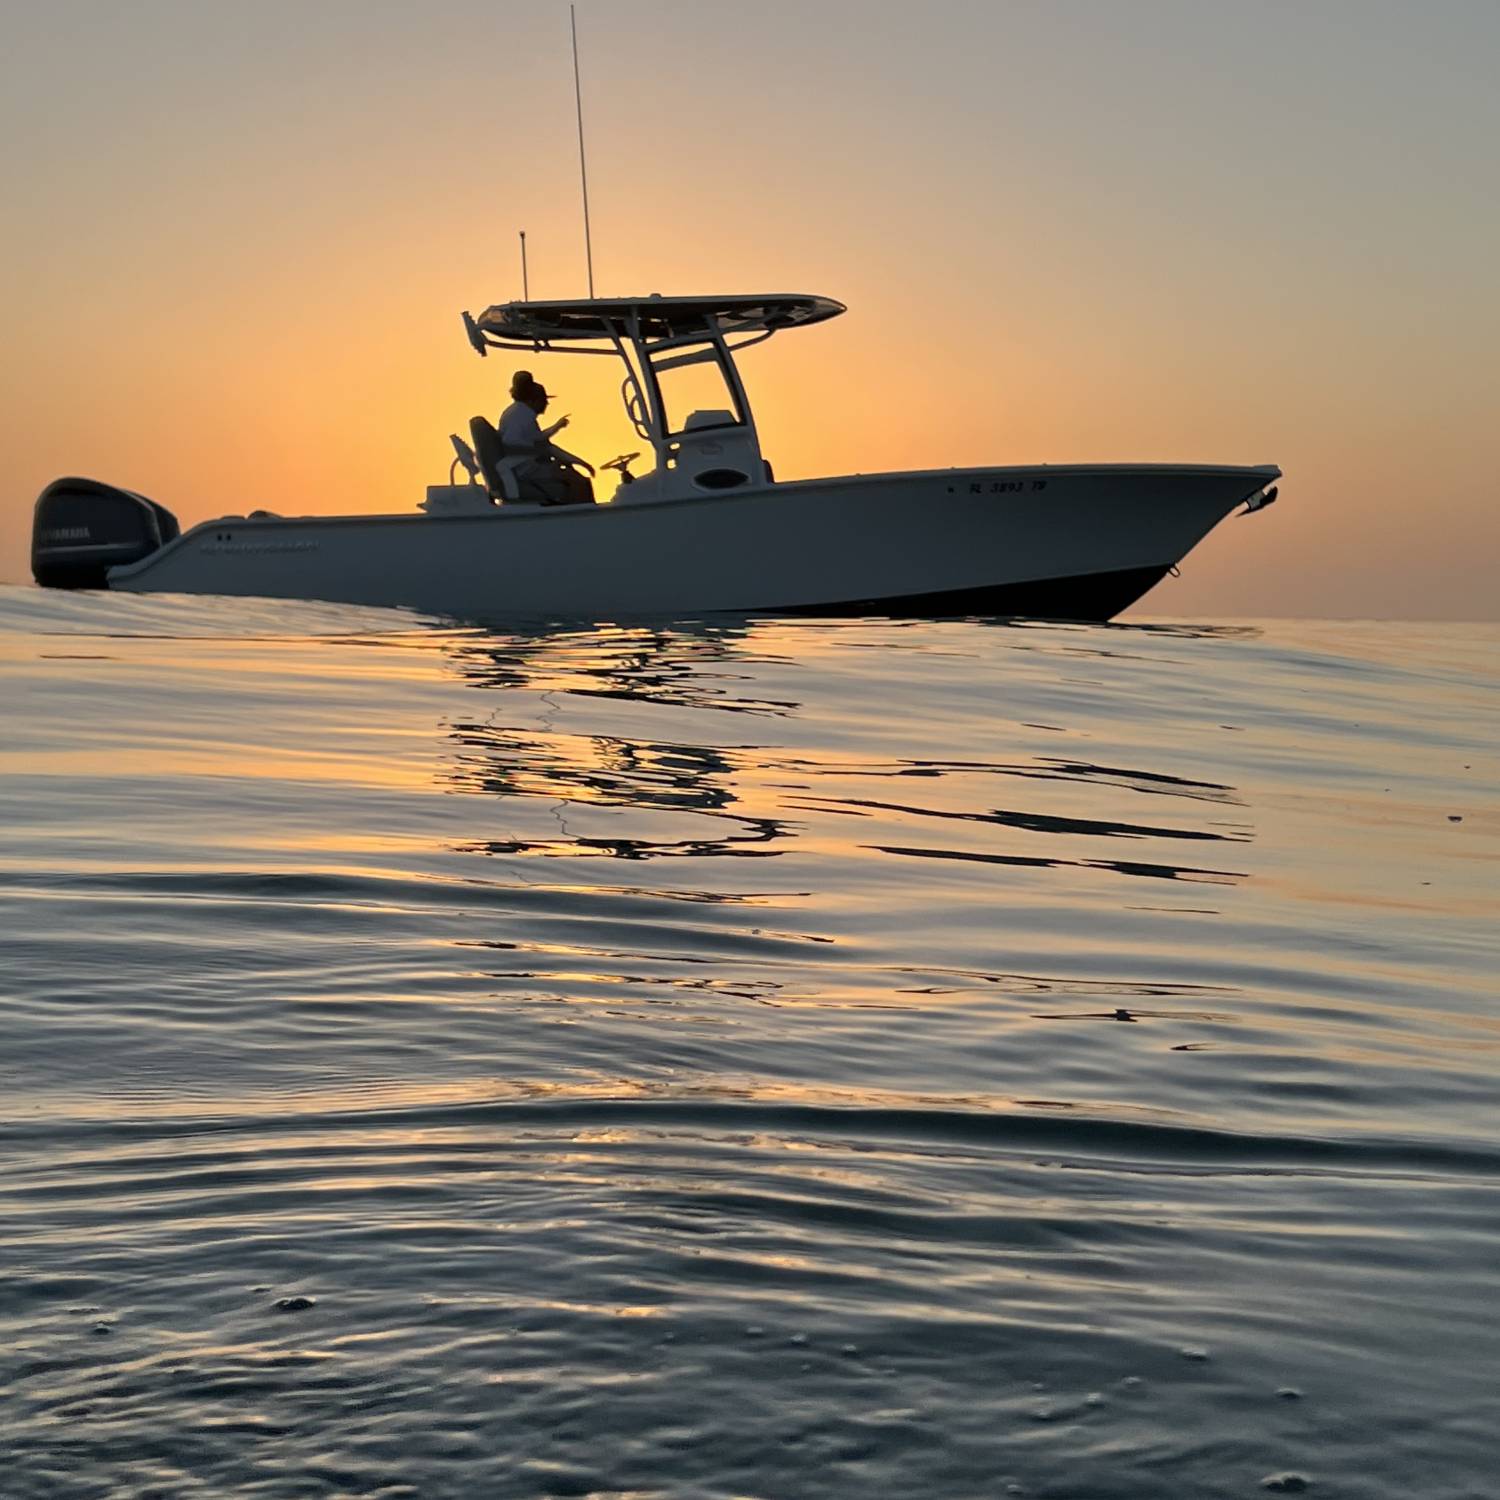 Title: Sunset Cruize - On board their Sportsman Open 282 Center Console - Location: Naples, FL. Participating in the Photo Contest #SportsmanApril